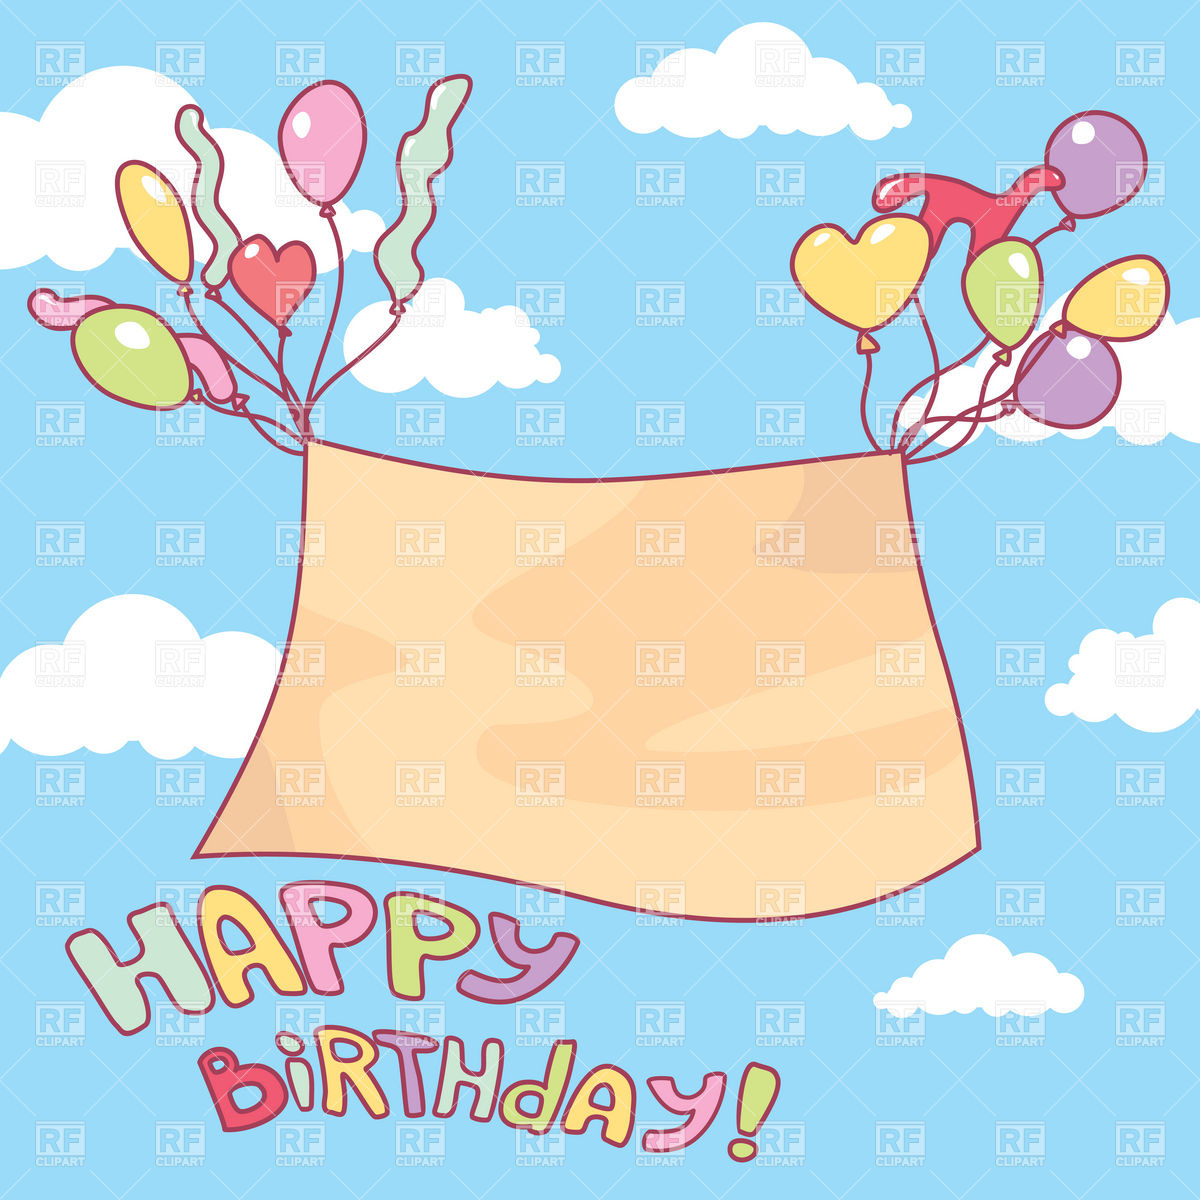 Empty Banner Flying On Balloons   Birthday Card 20180 Borders And